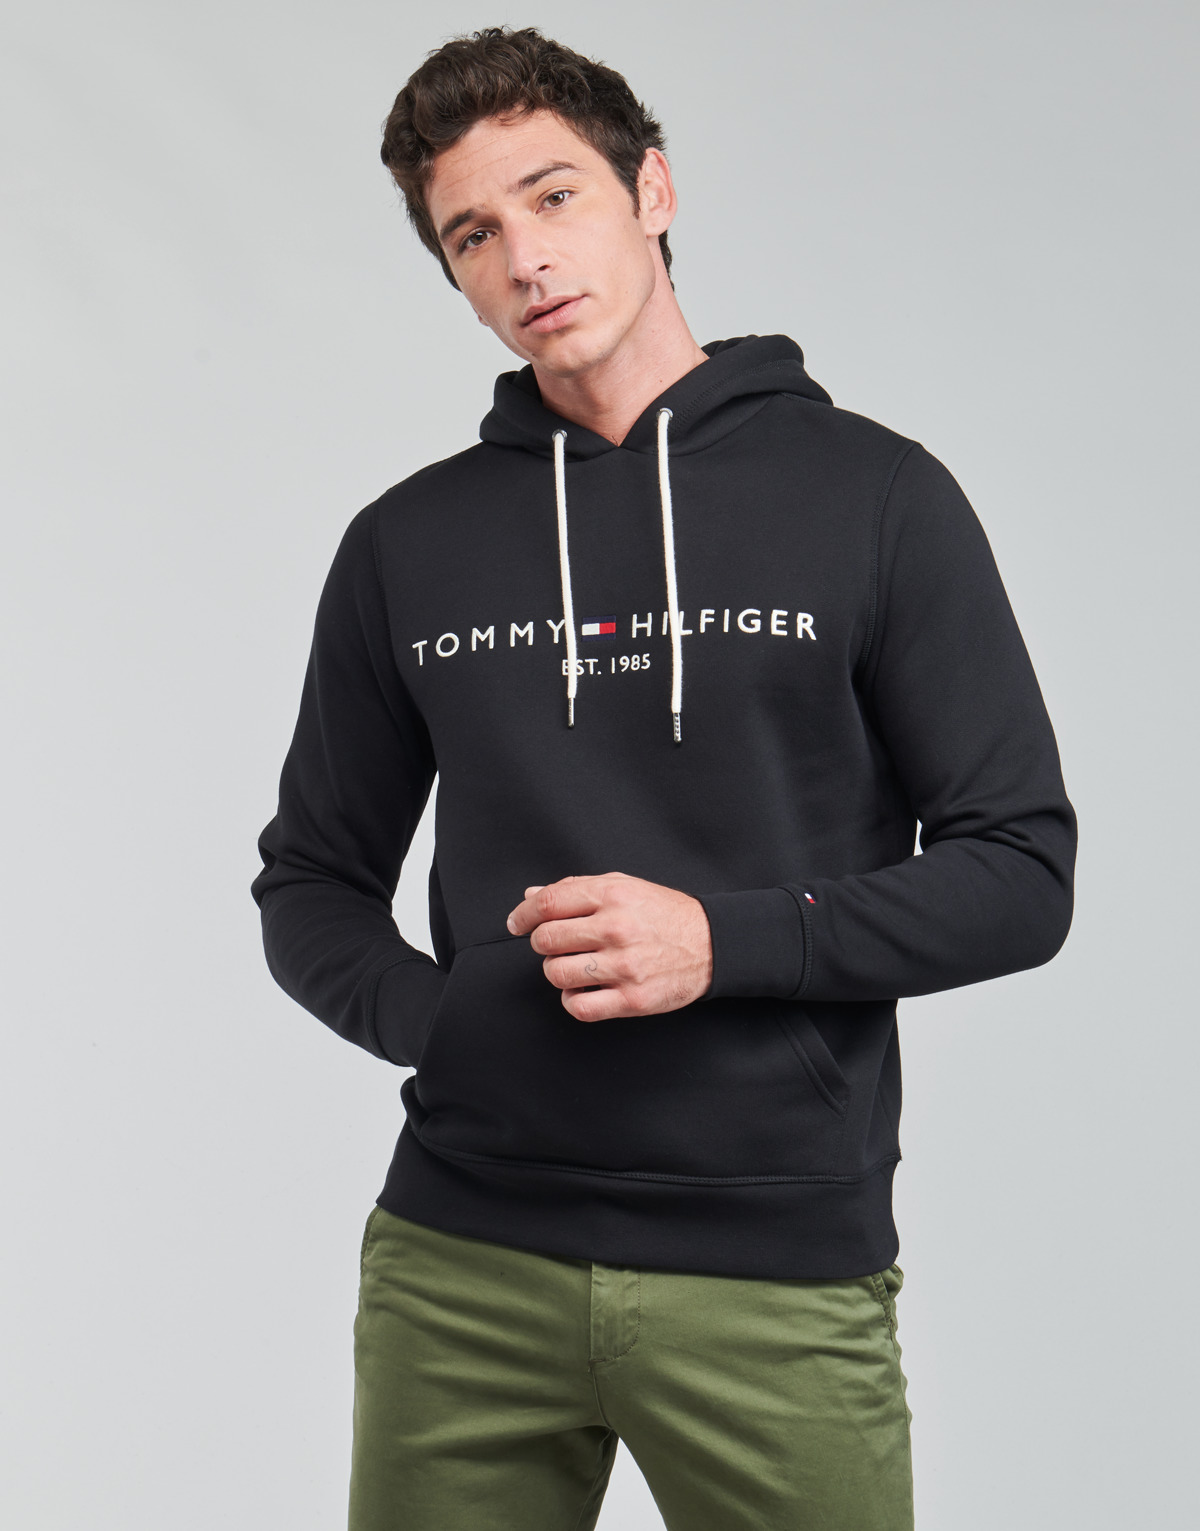 TOMMY HILFIGER, only for 29,00 €